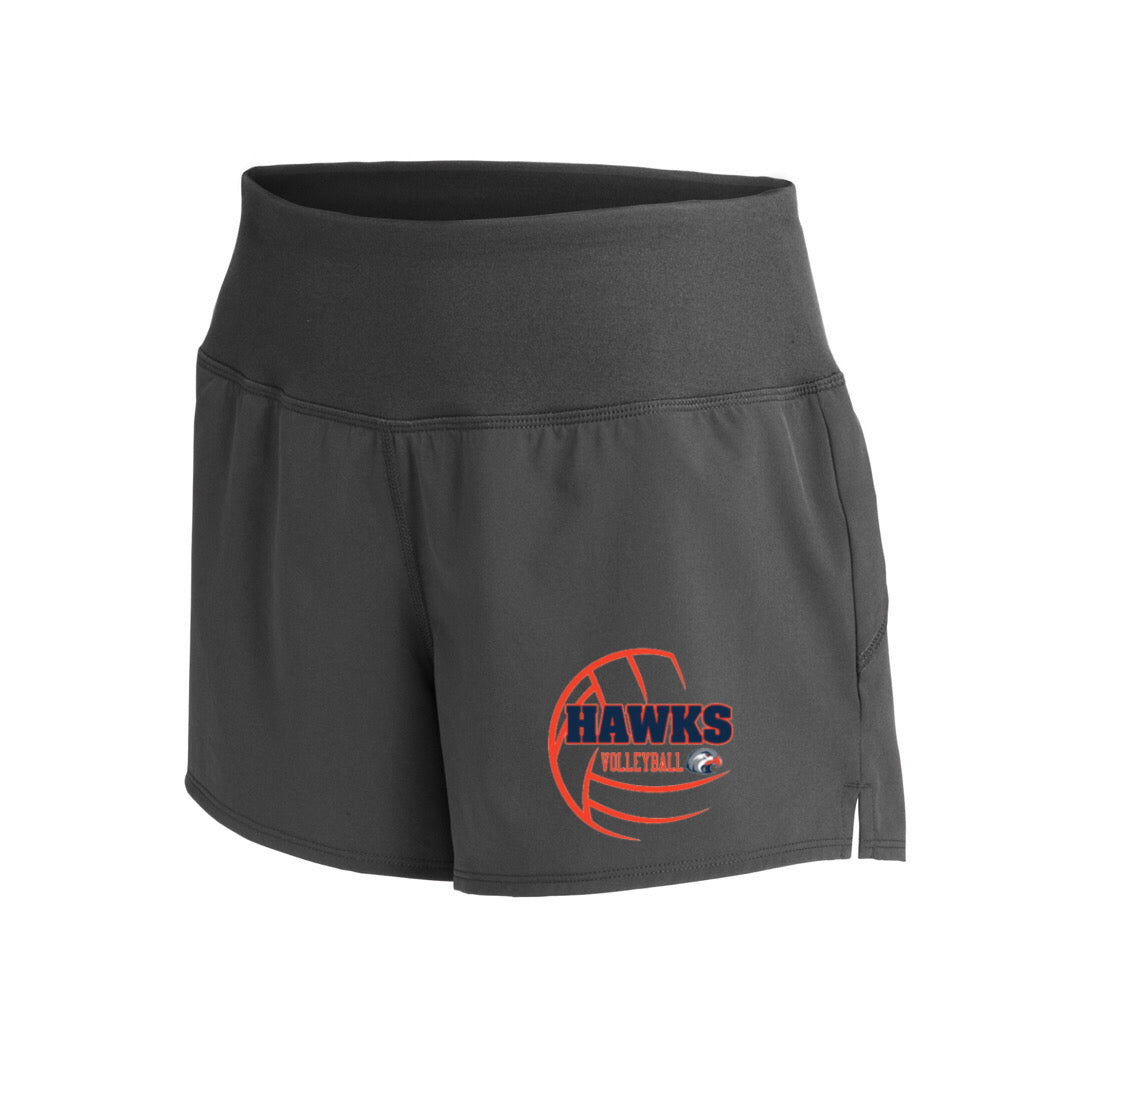 Hawks Volleyball Ladies Shorts - Multiple Color Options - (ALL PRODUCTS WILL BE DELIVERED TO SCHOOL)